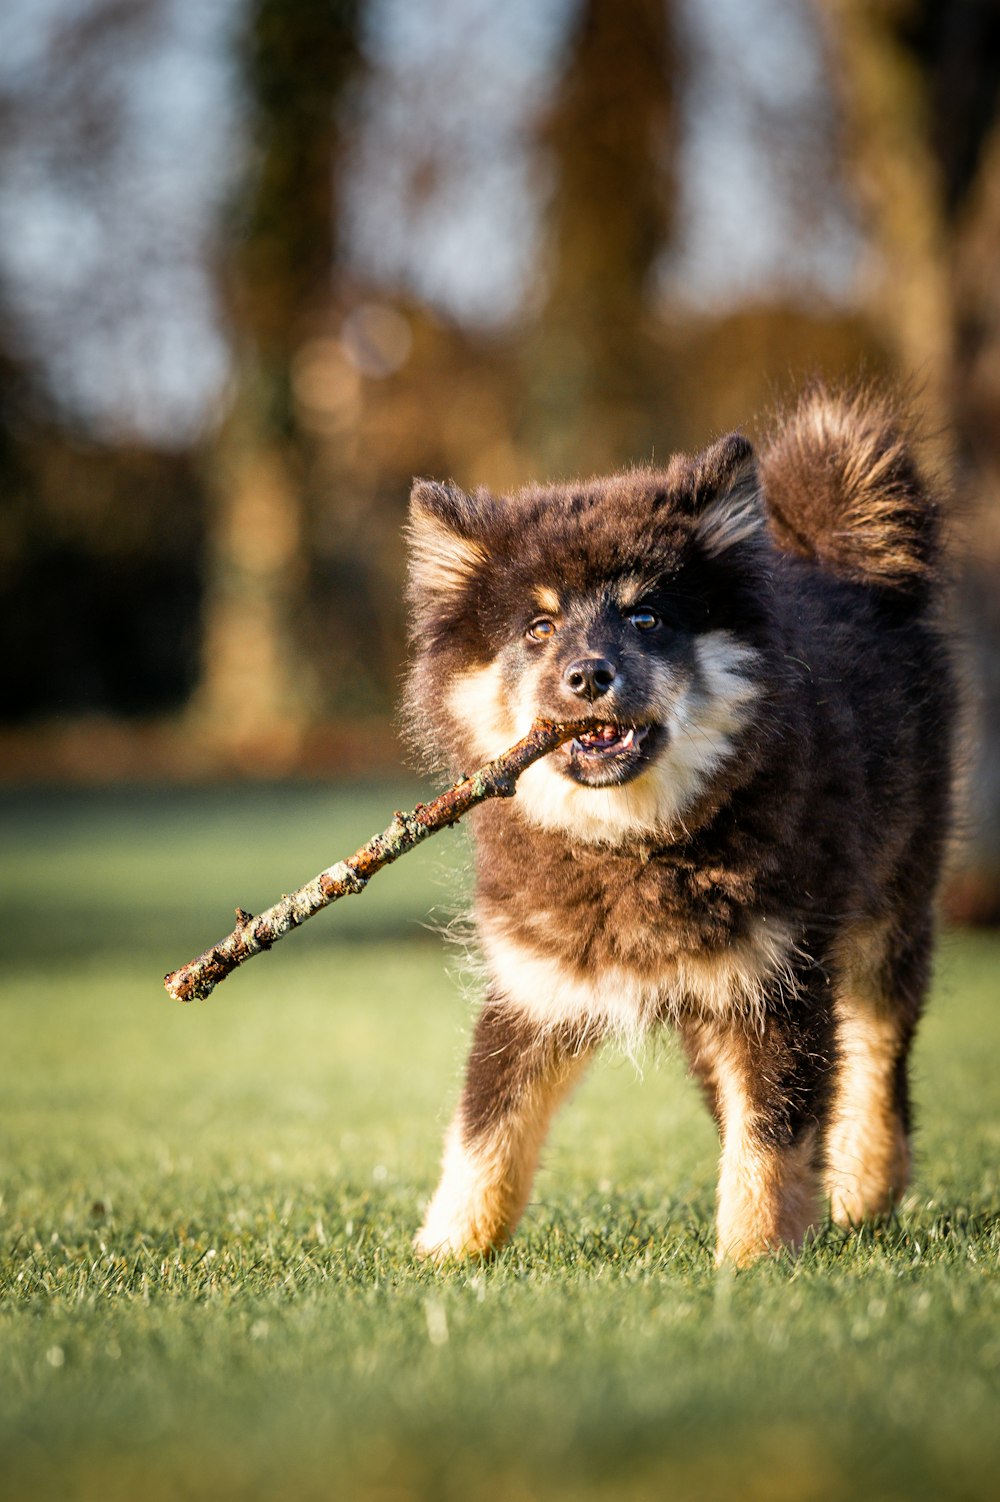 a small dog carrying a stick in its mouth